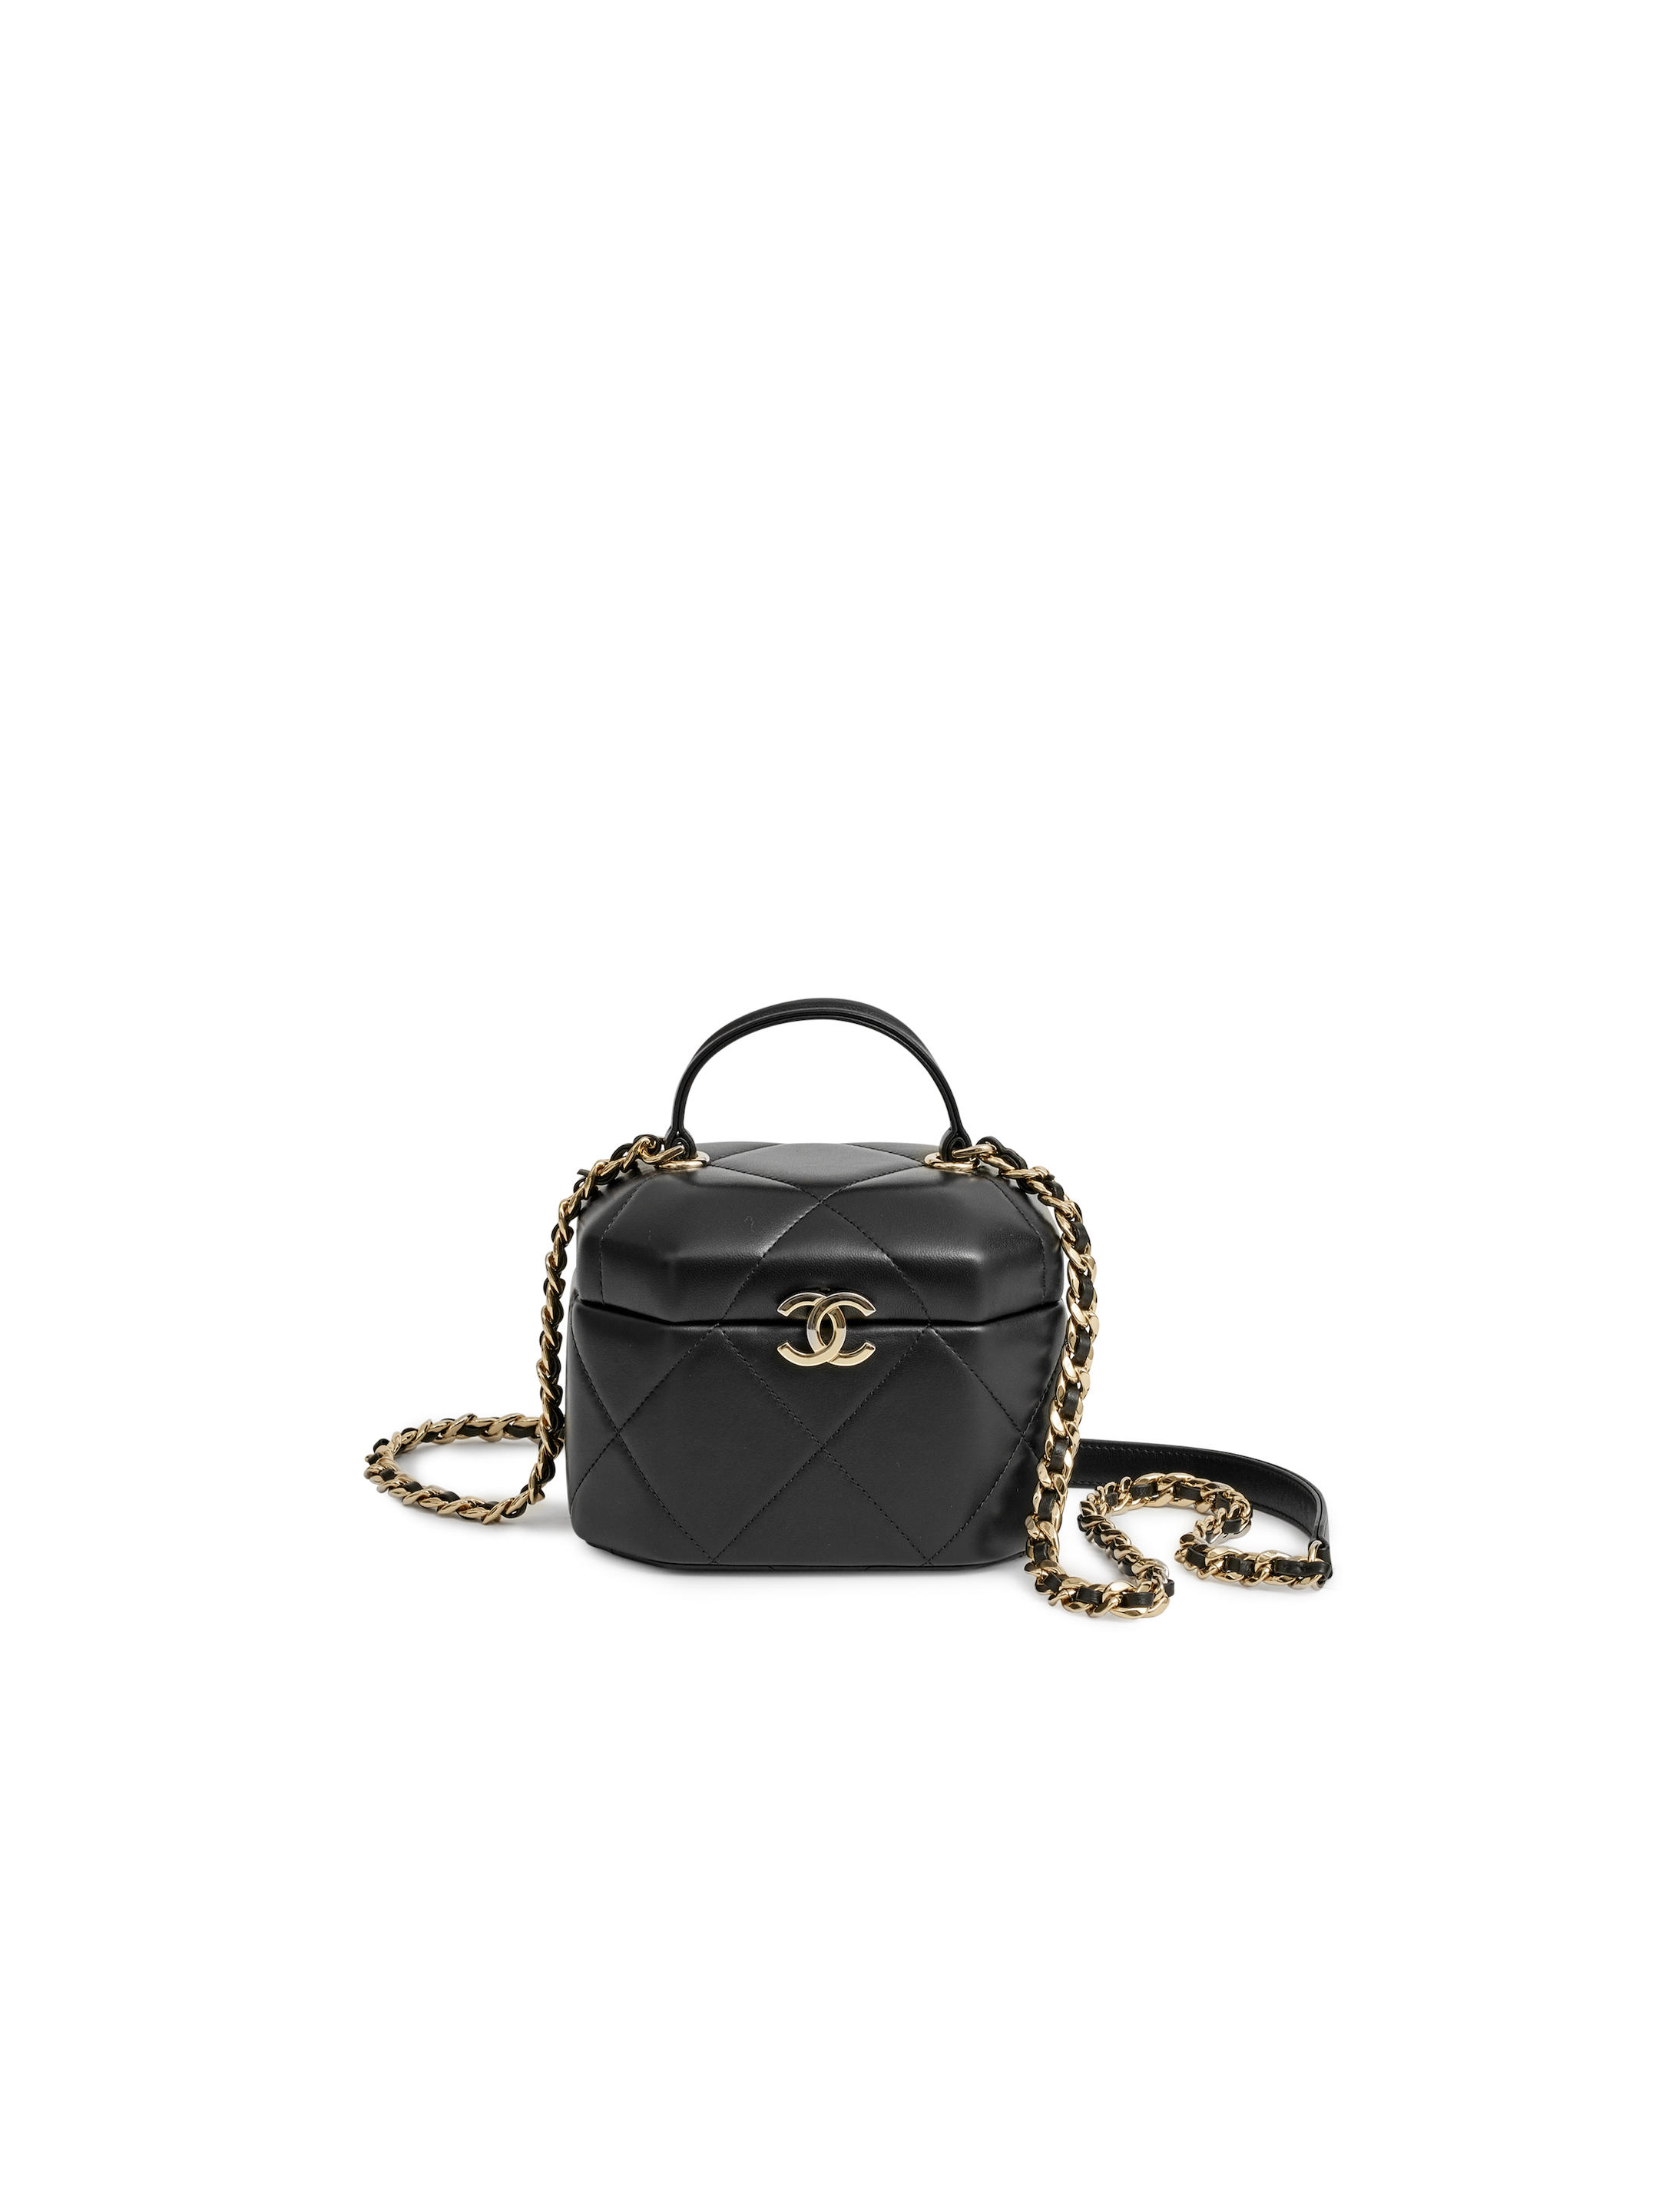 Bonhams : Chanel Black Lambskin Small Vanity Case with Gold Hardware (includes  dust bag and orignal box)